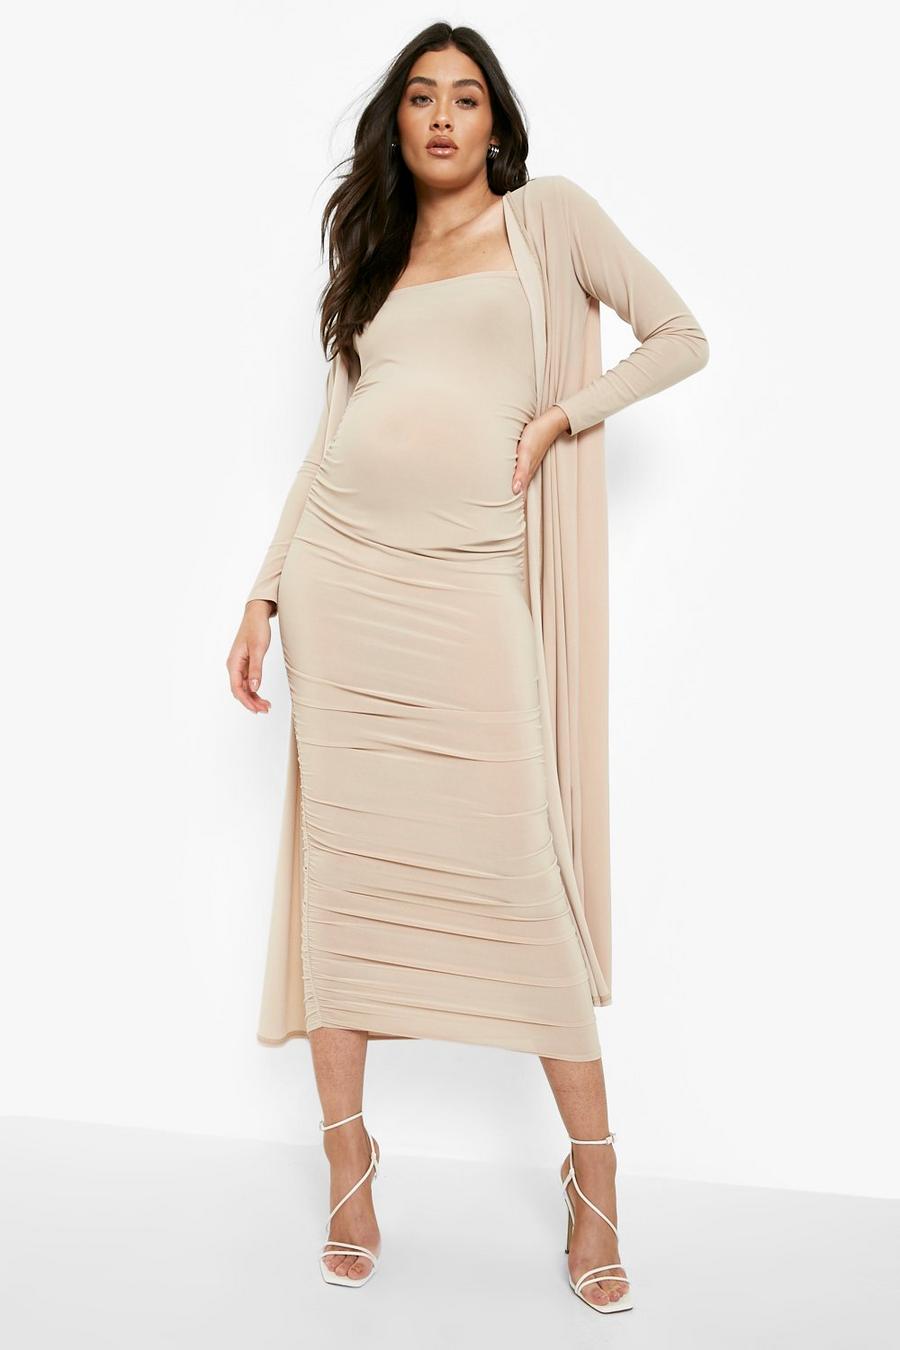 Stone Maternity Square Neck Ruched Duster Dress Set